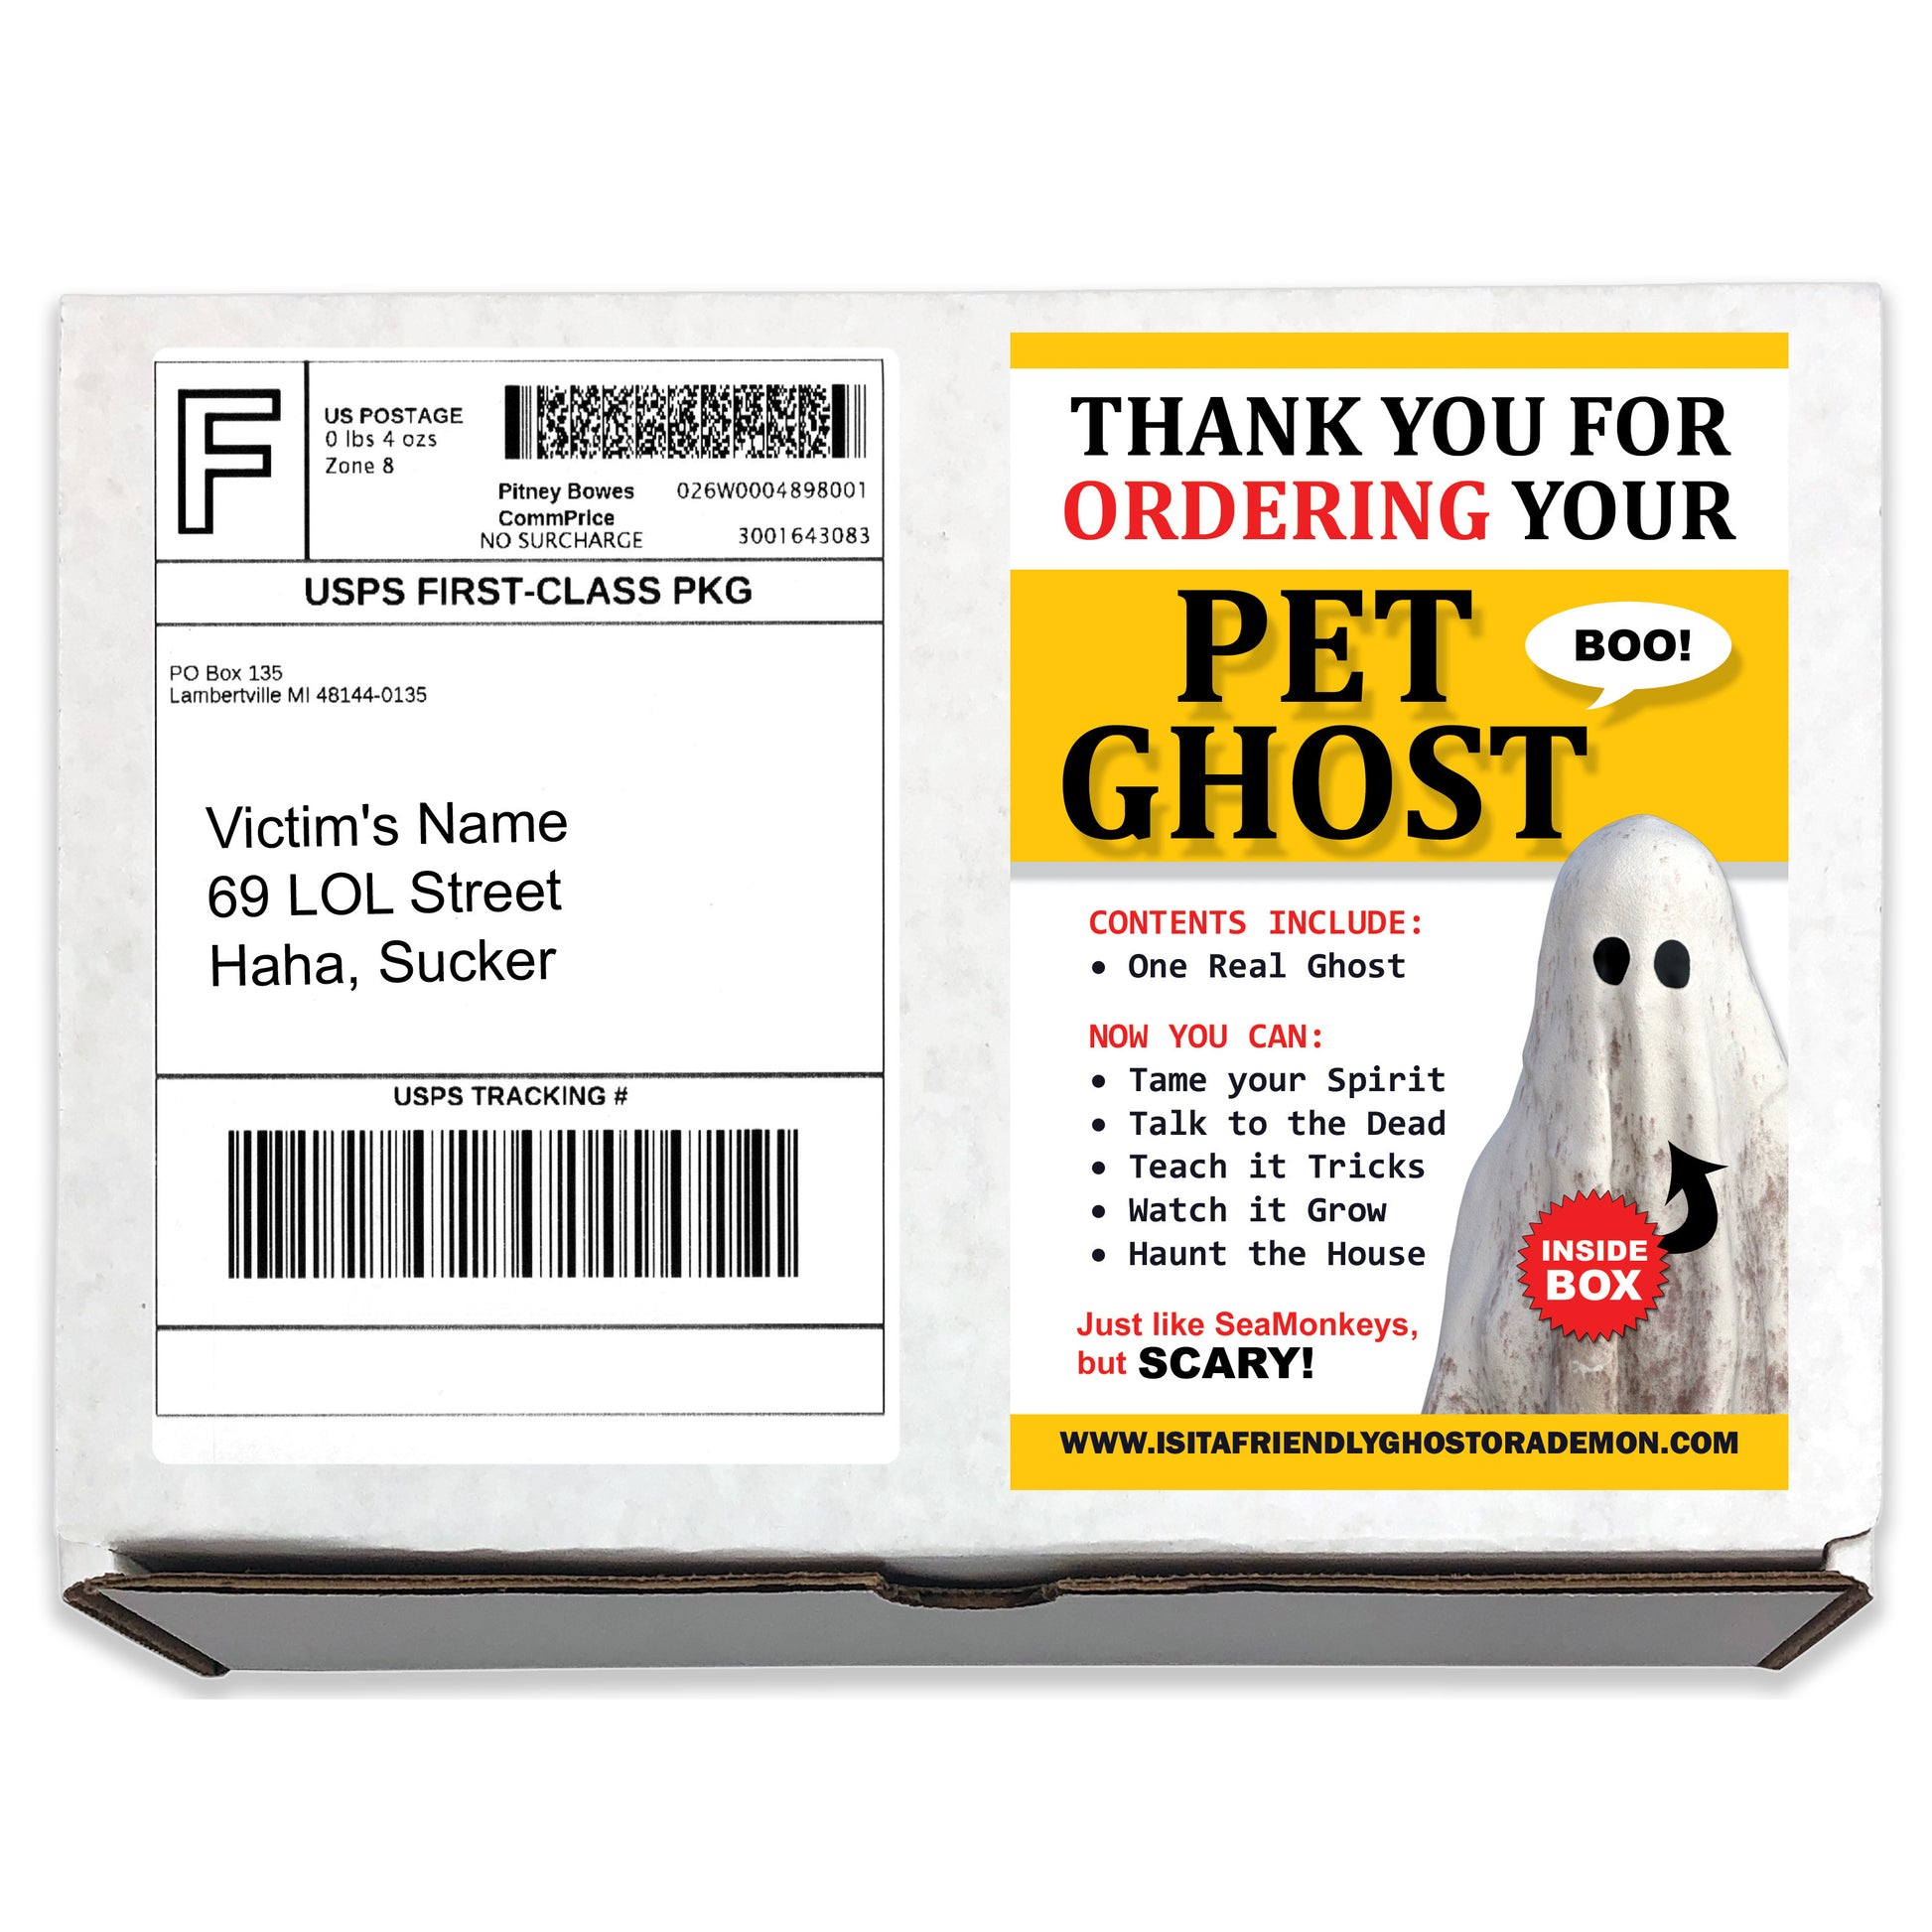 Pet Ghost embarrassing prank box gets mailed directly to your victims